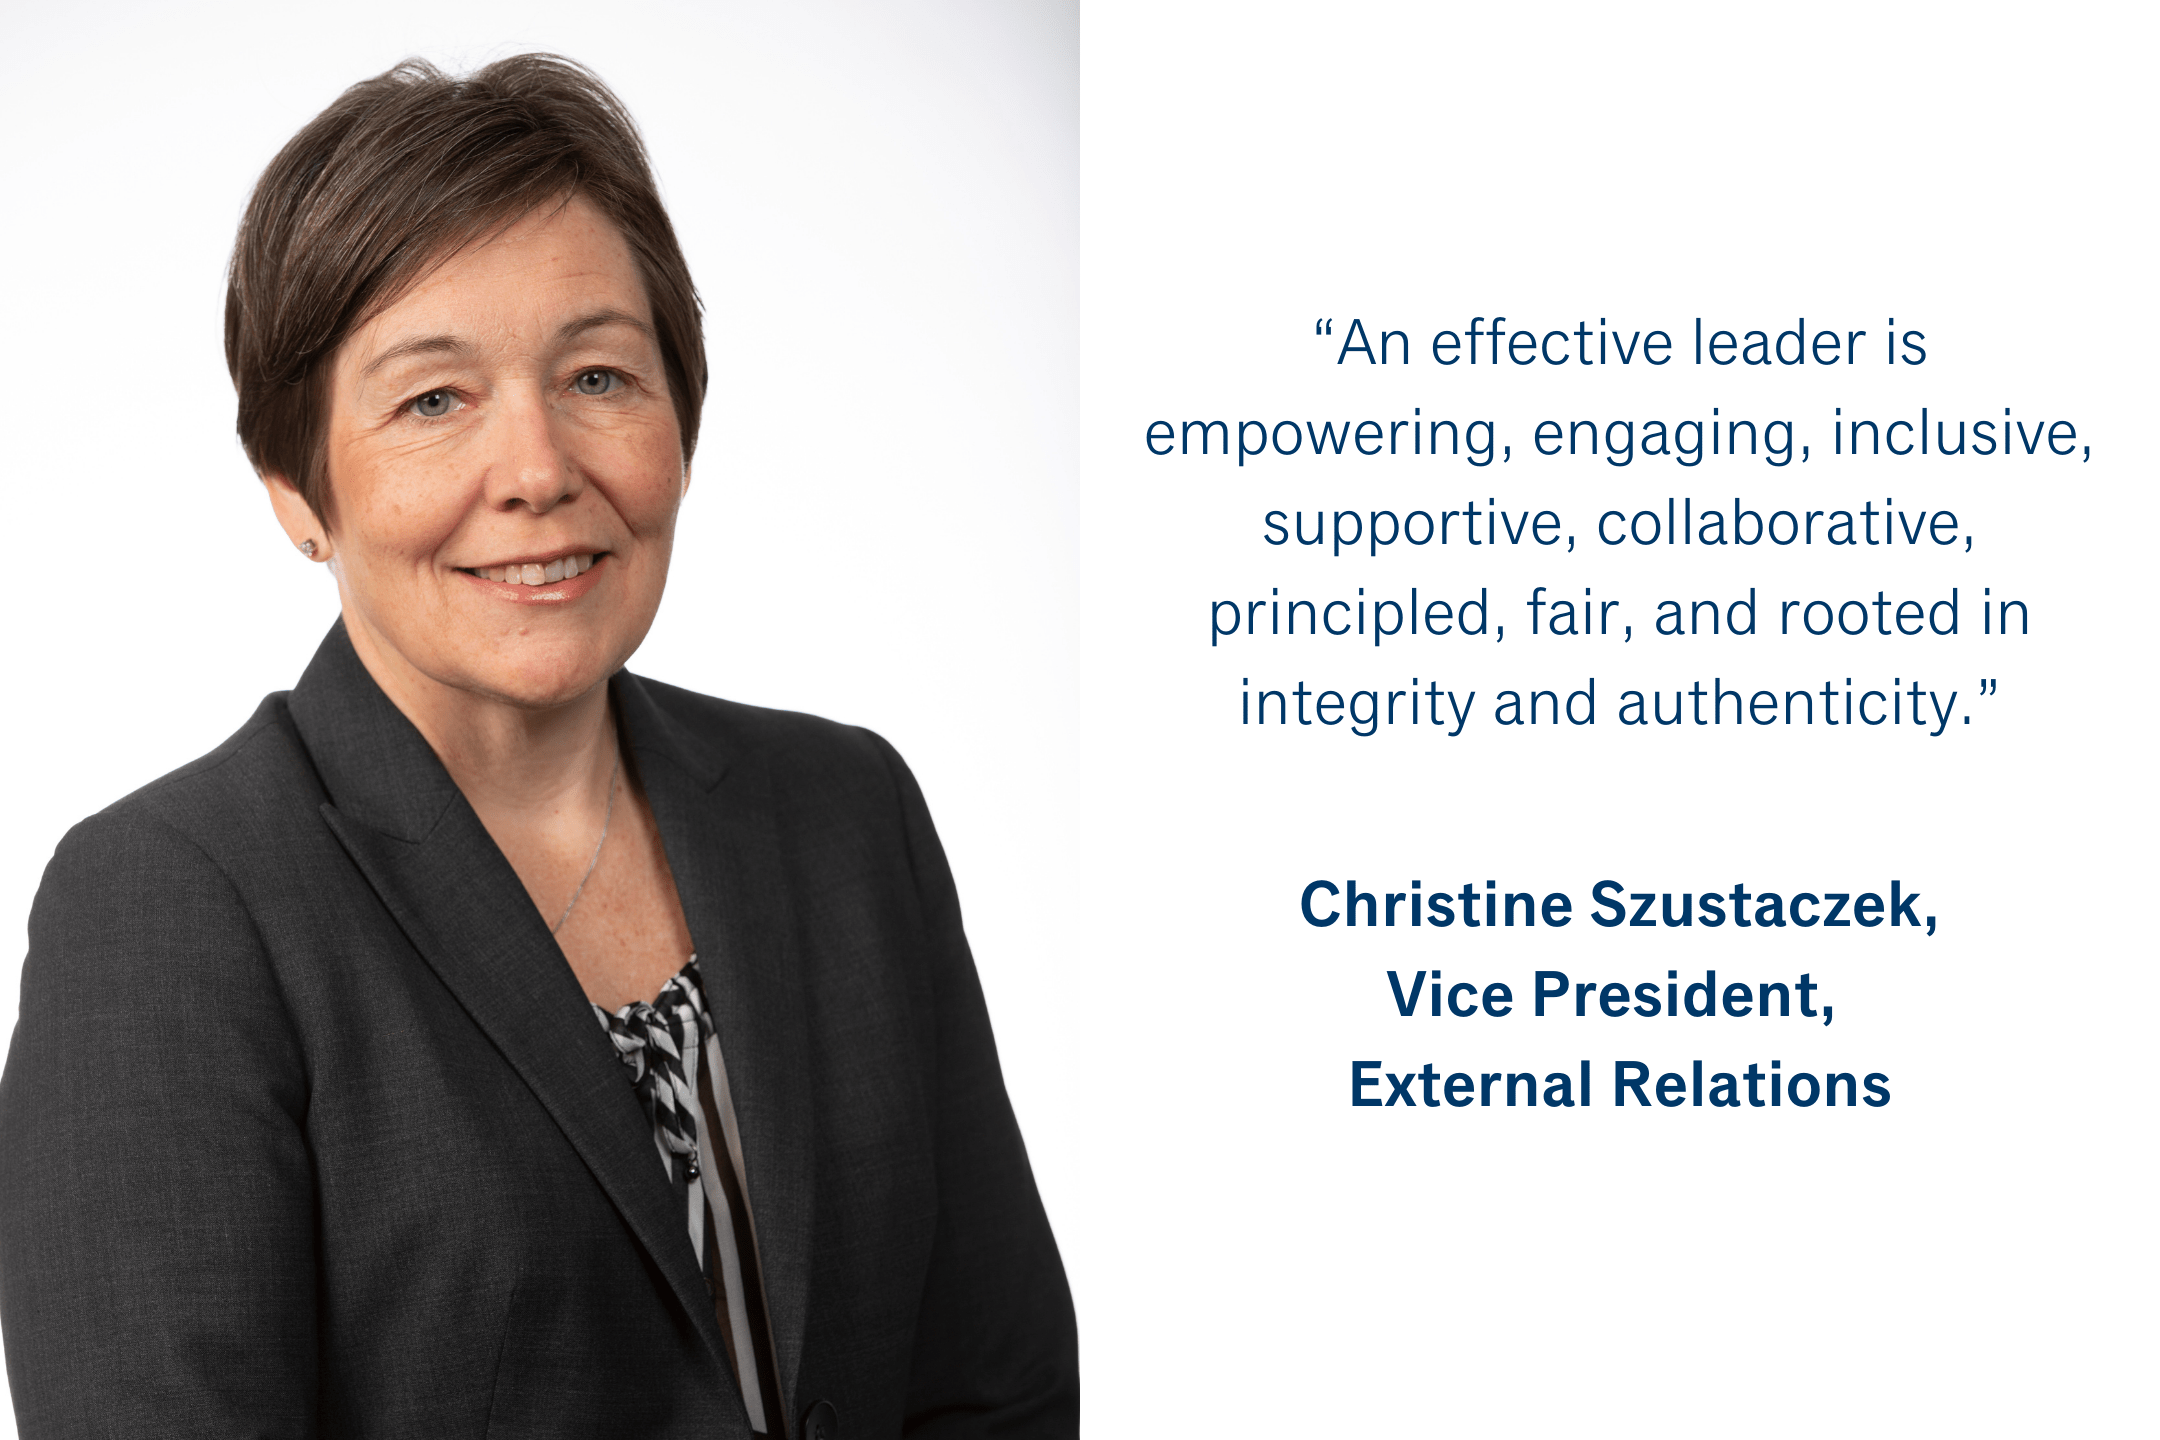 “An effective leader is empowering, engaging, inclusive, supportive, collaborative, principled, fair, and rooted in integrity and authenticity.” - Christine Szustaczek